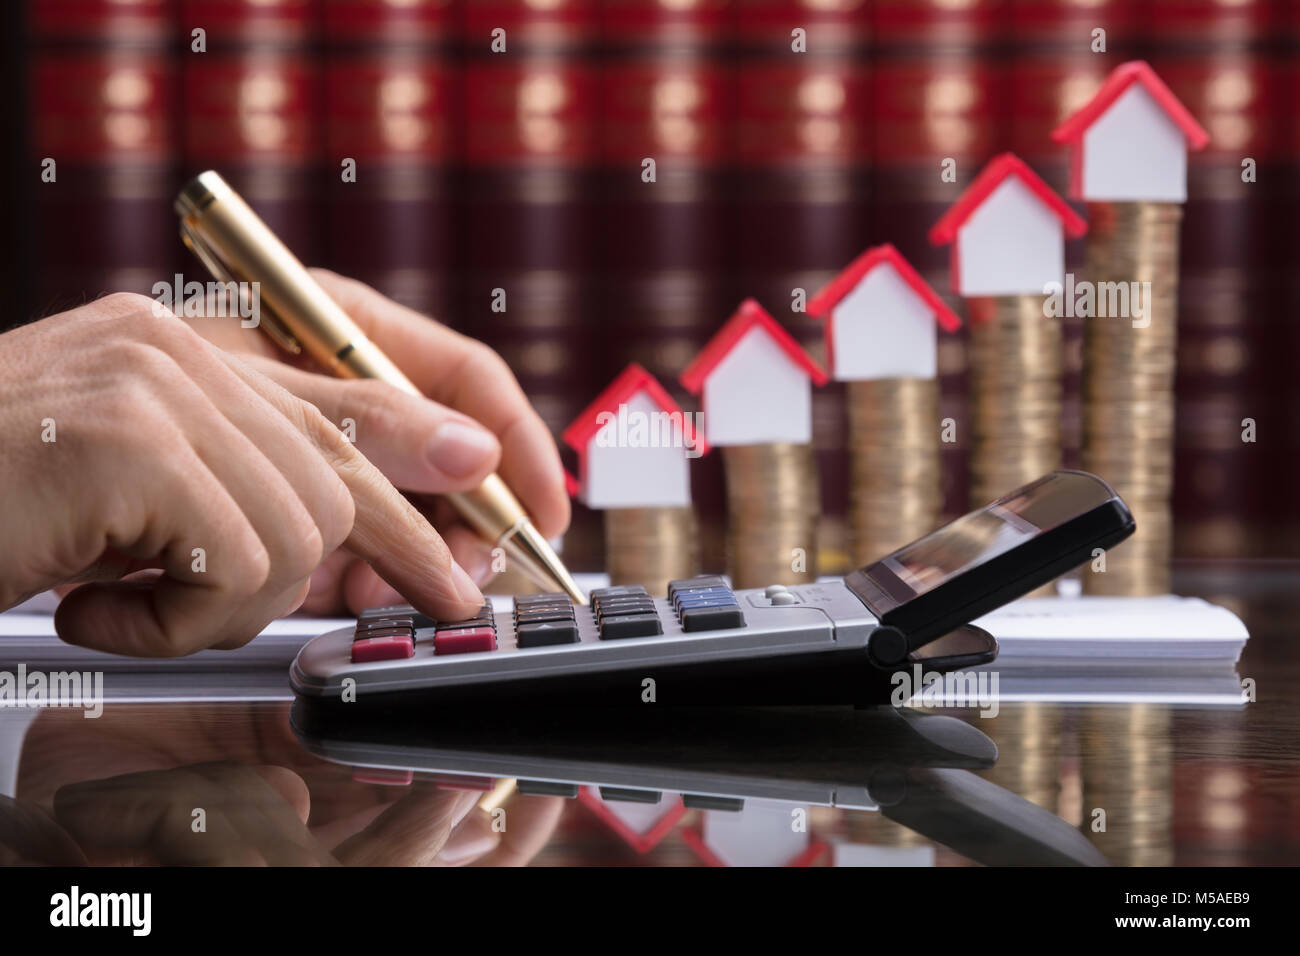 Person Calculating Invoice With Calculator In Front Of Stacked Coins And House Model Stock Photo